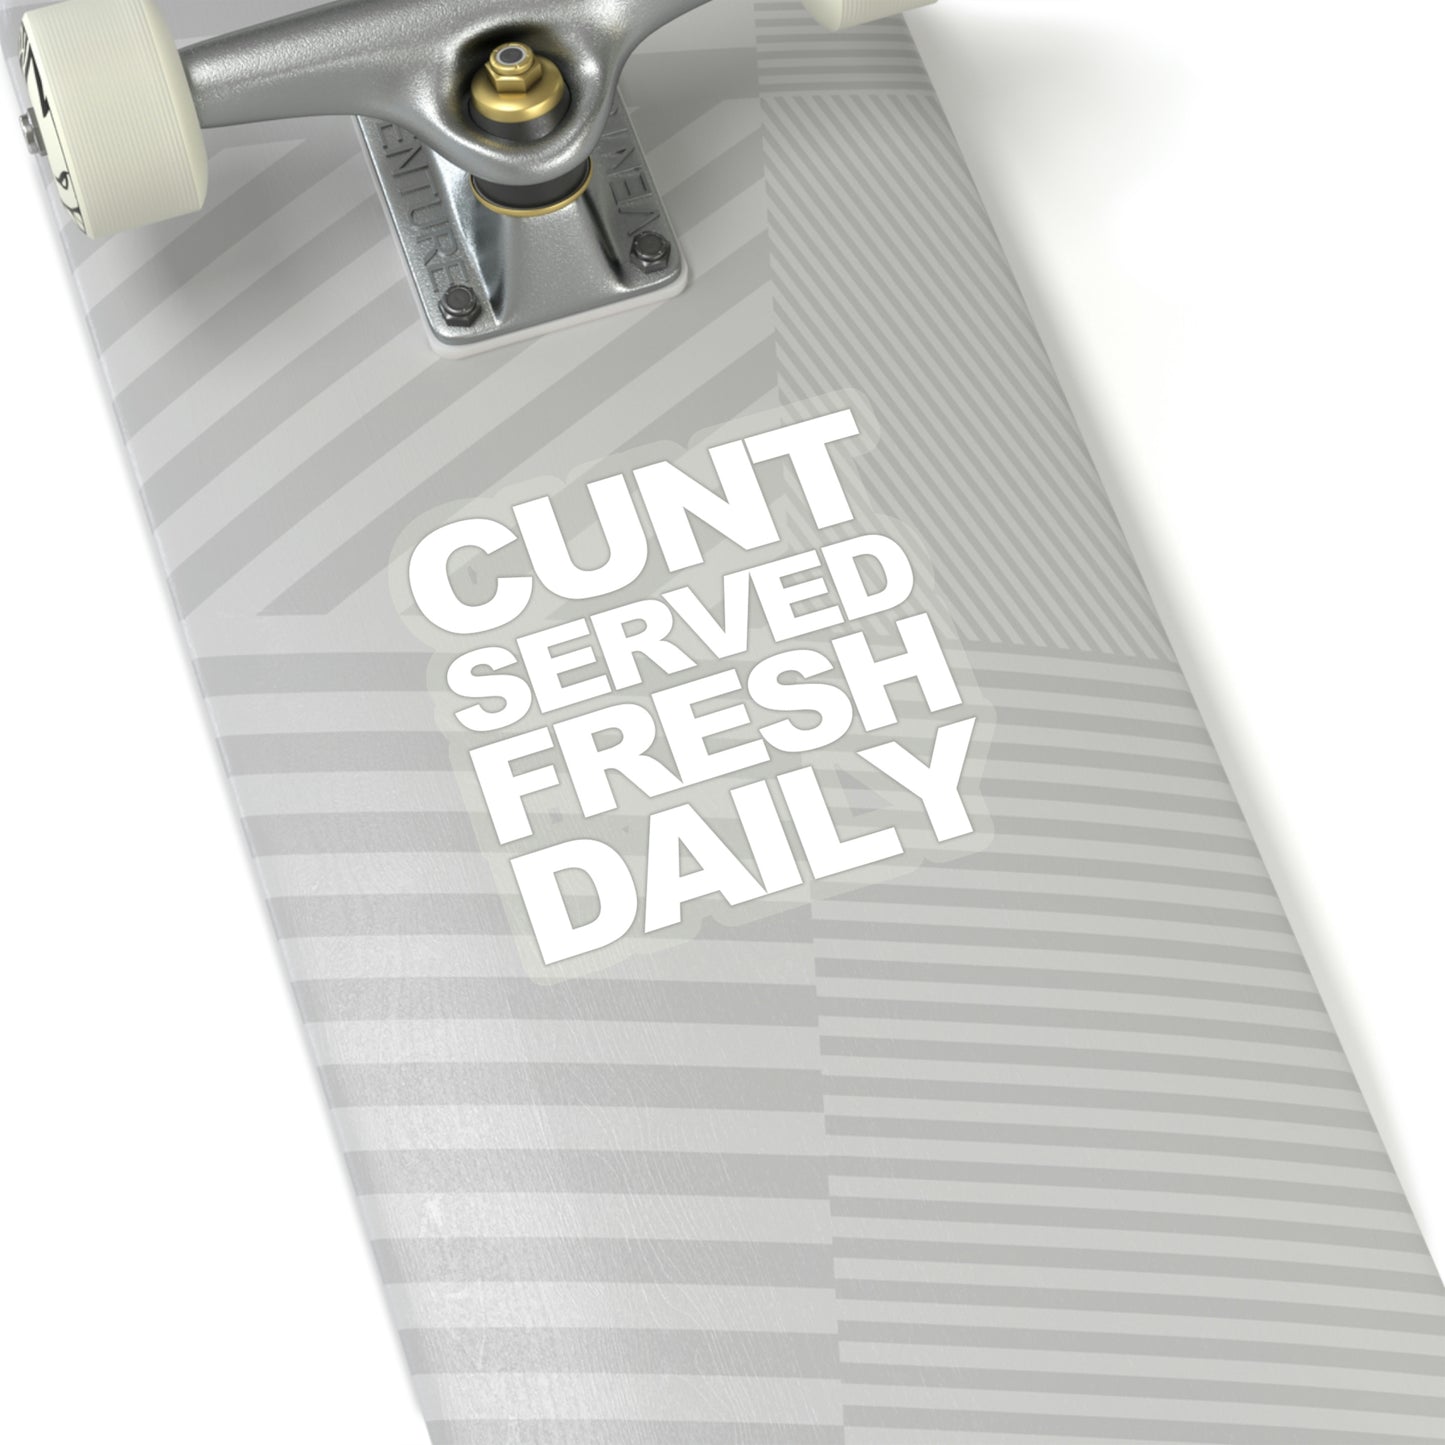 Cunt Served Fresh Daily Shirt, Y2k Aesthetic Sticker